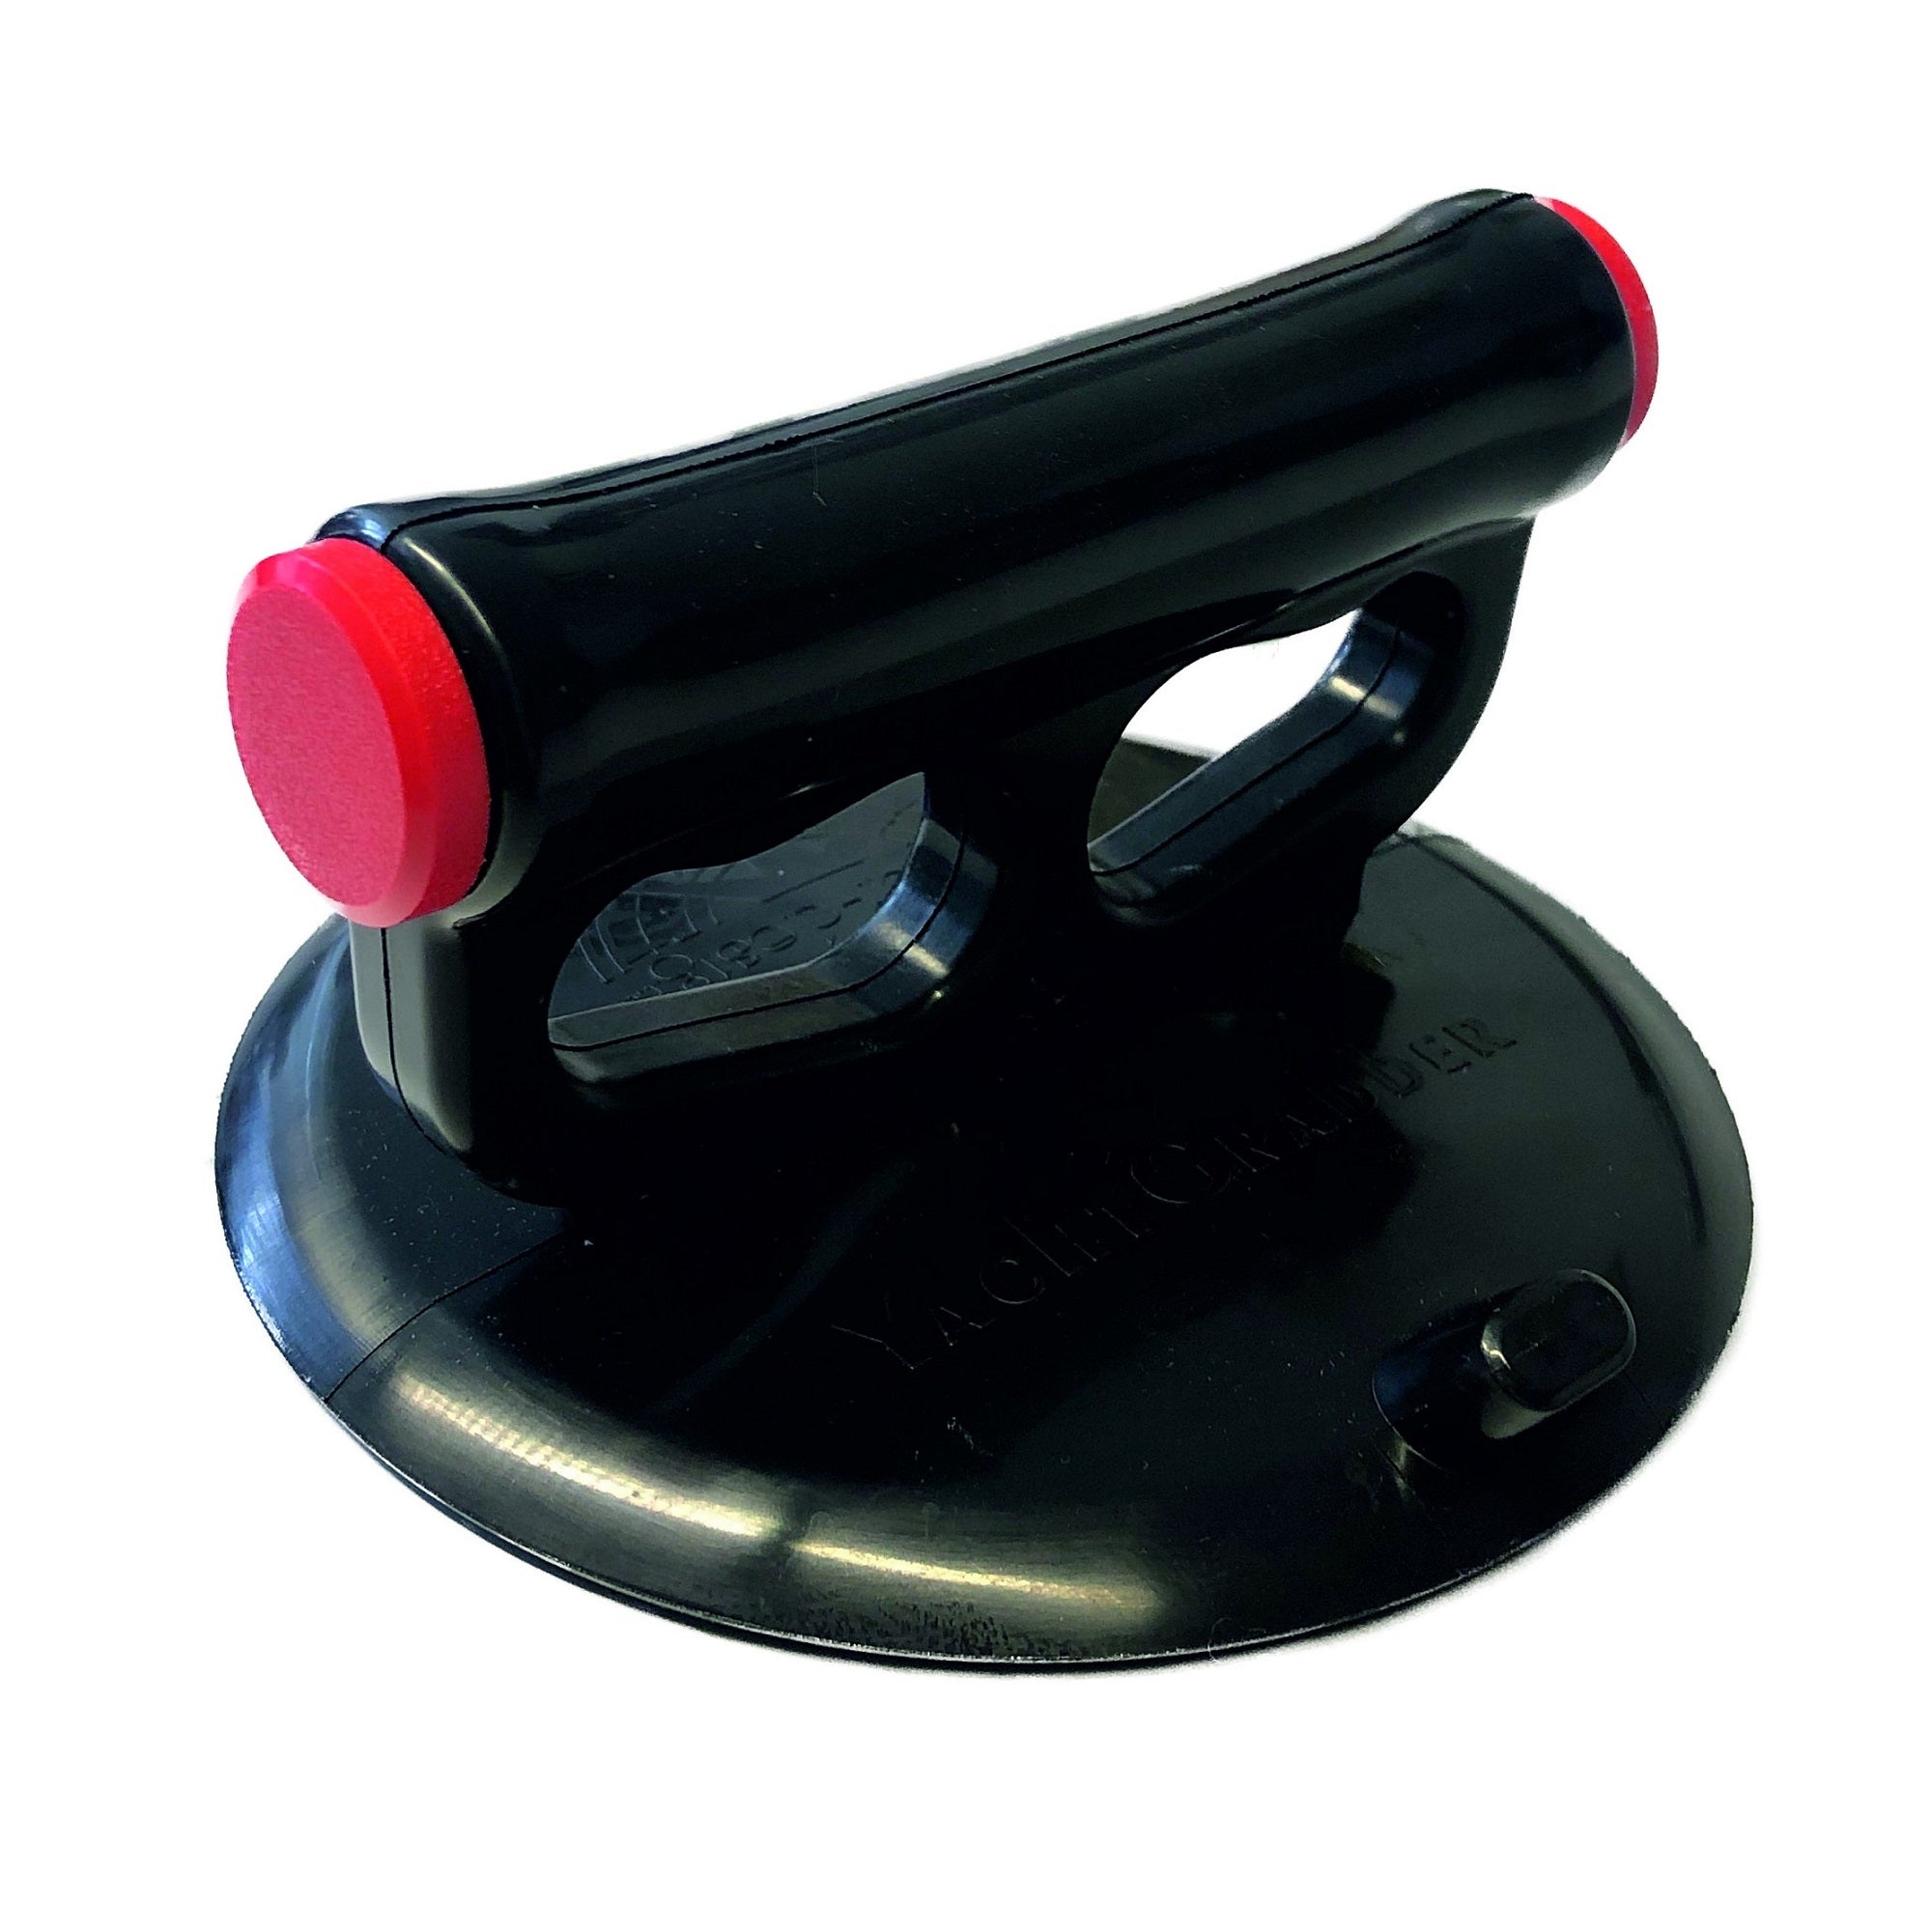 Yacht-grabber Suction Cup